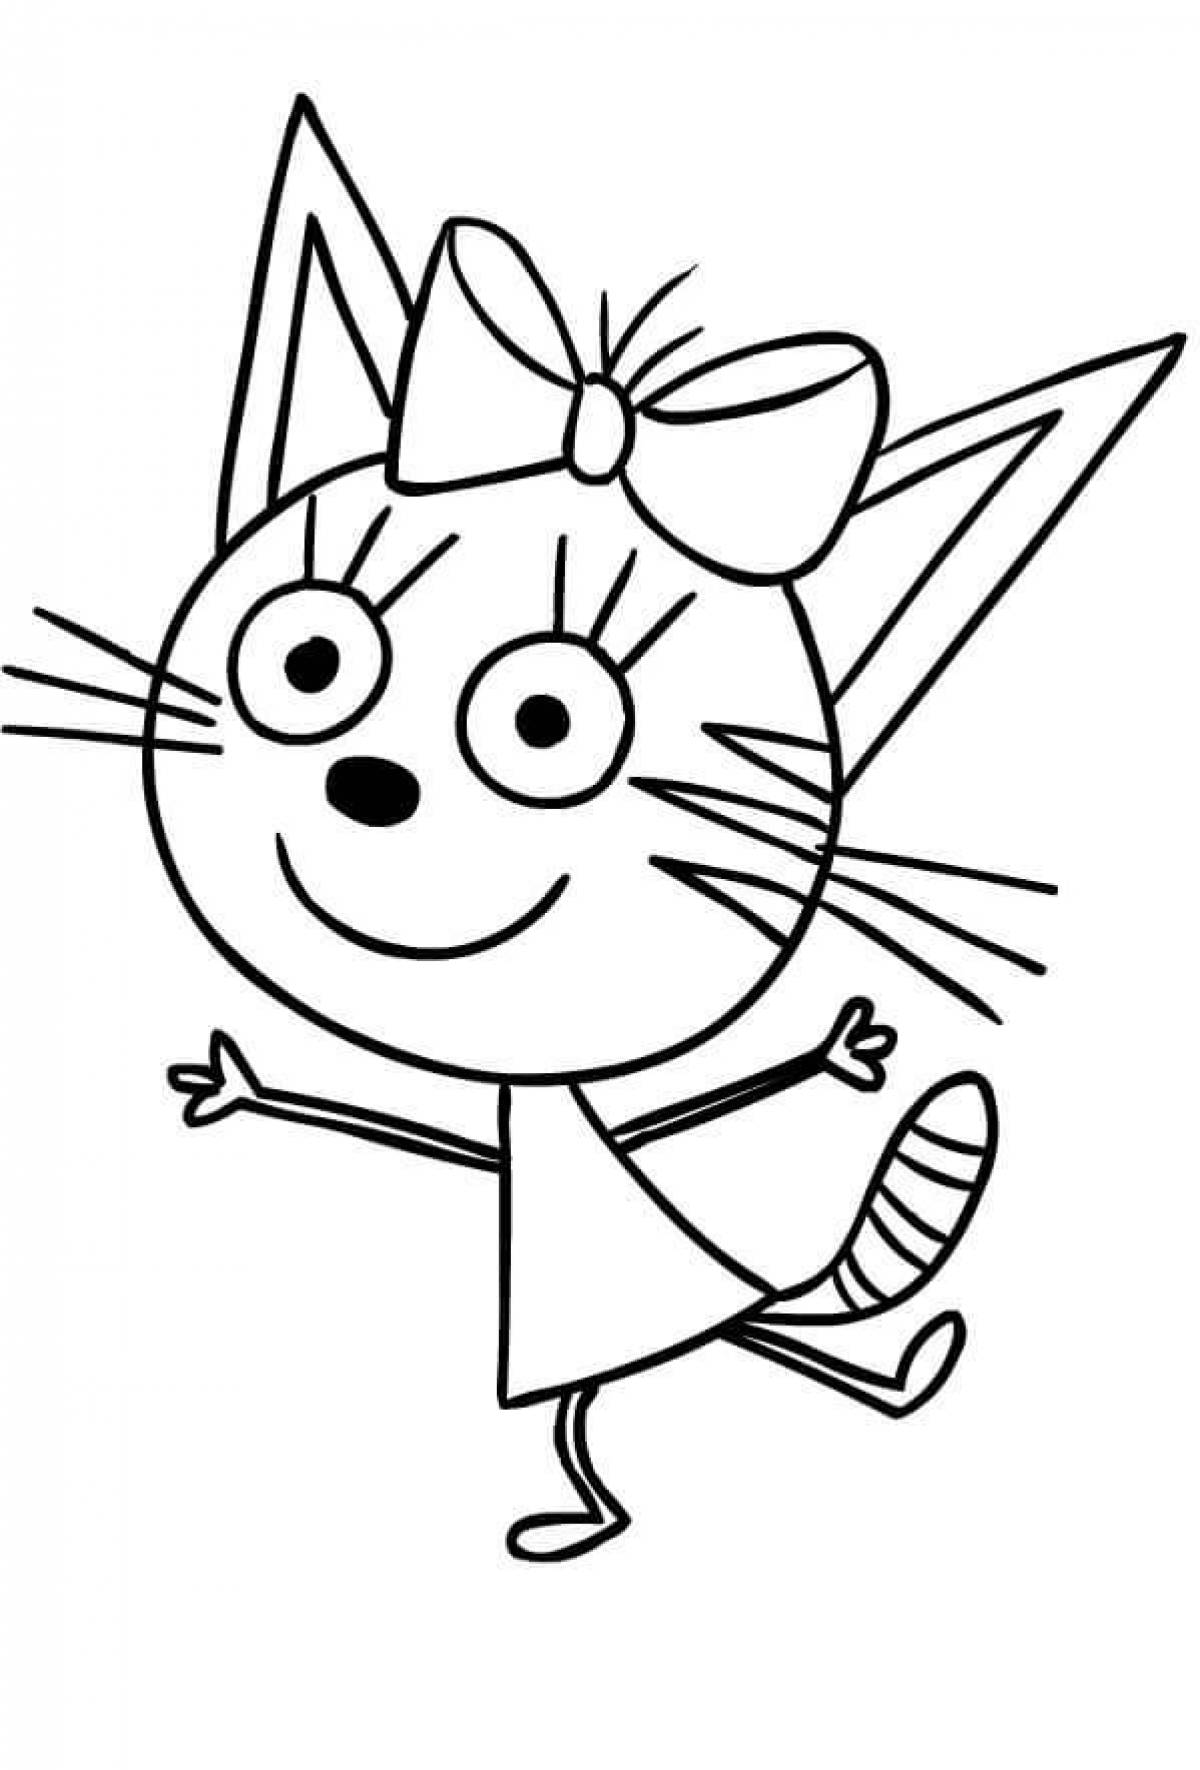 Three cats coloring pages for kids